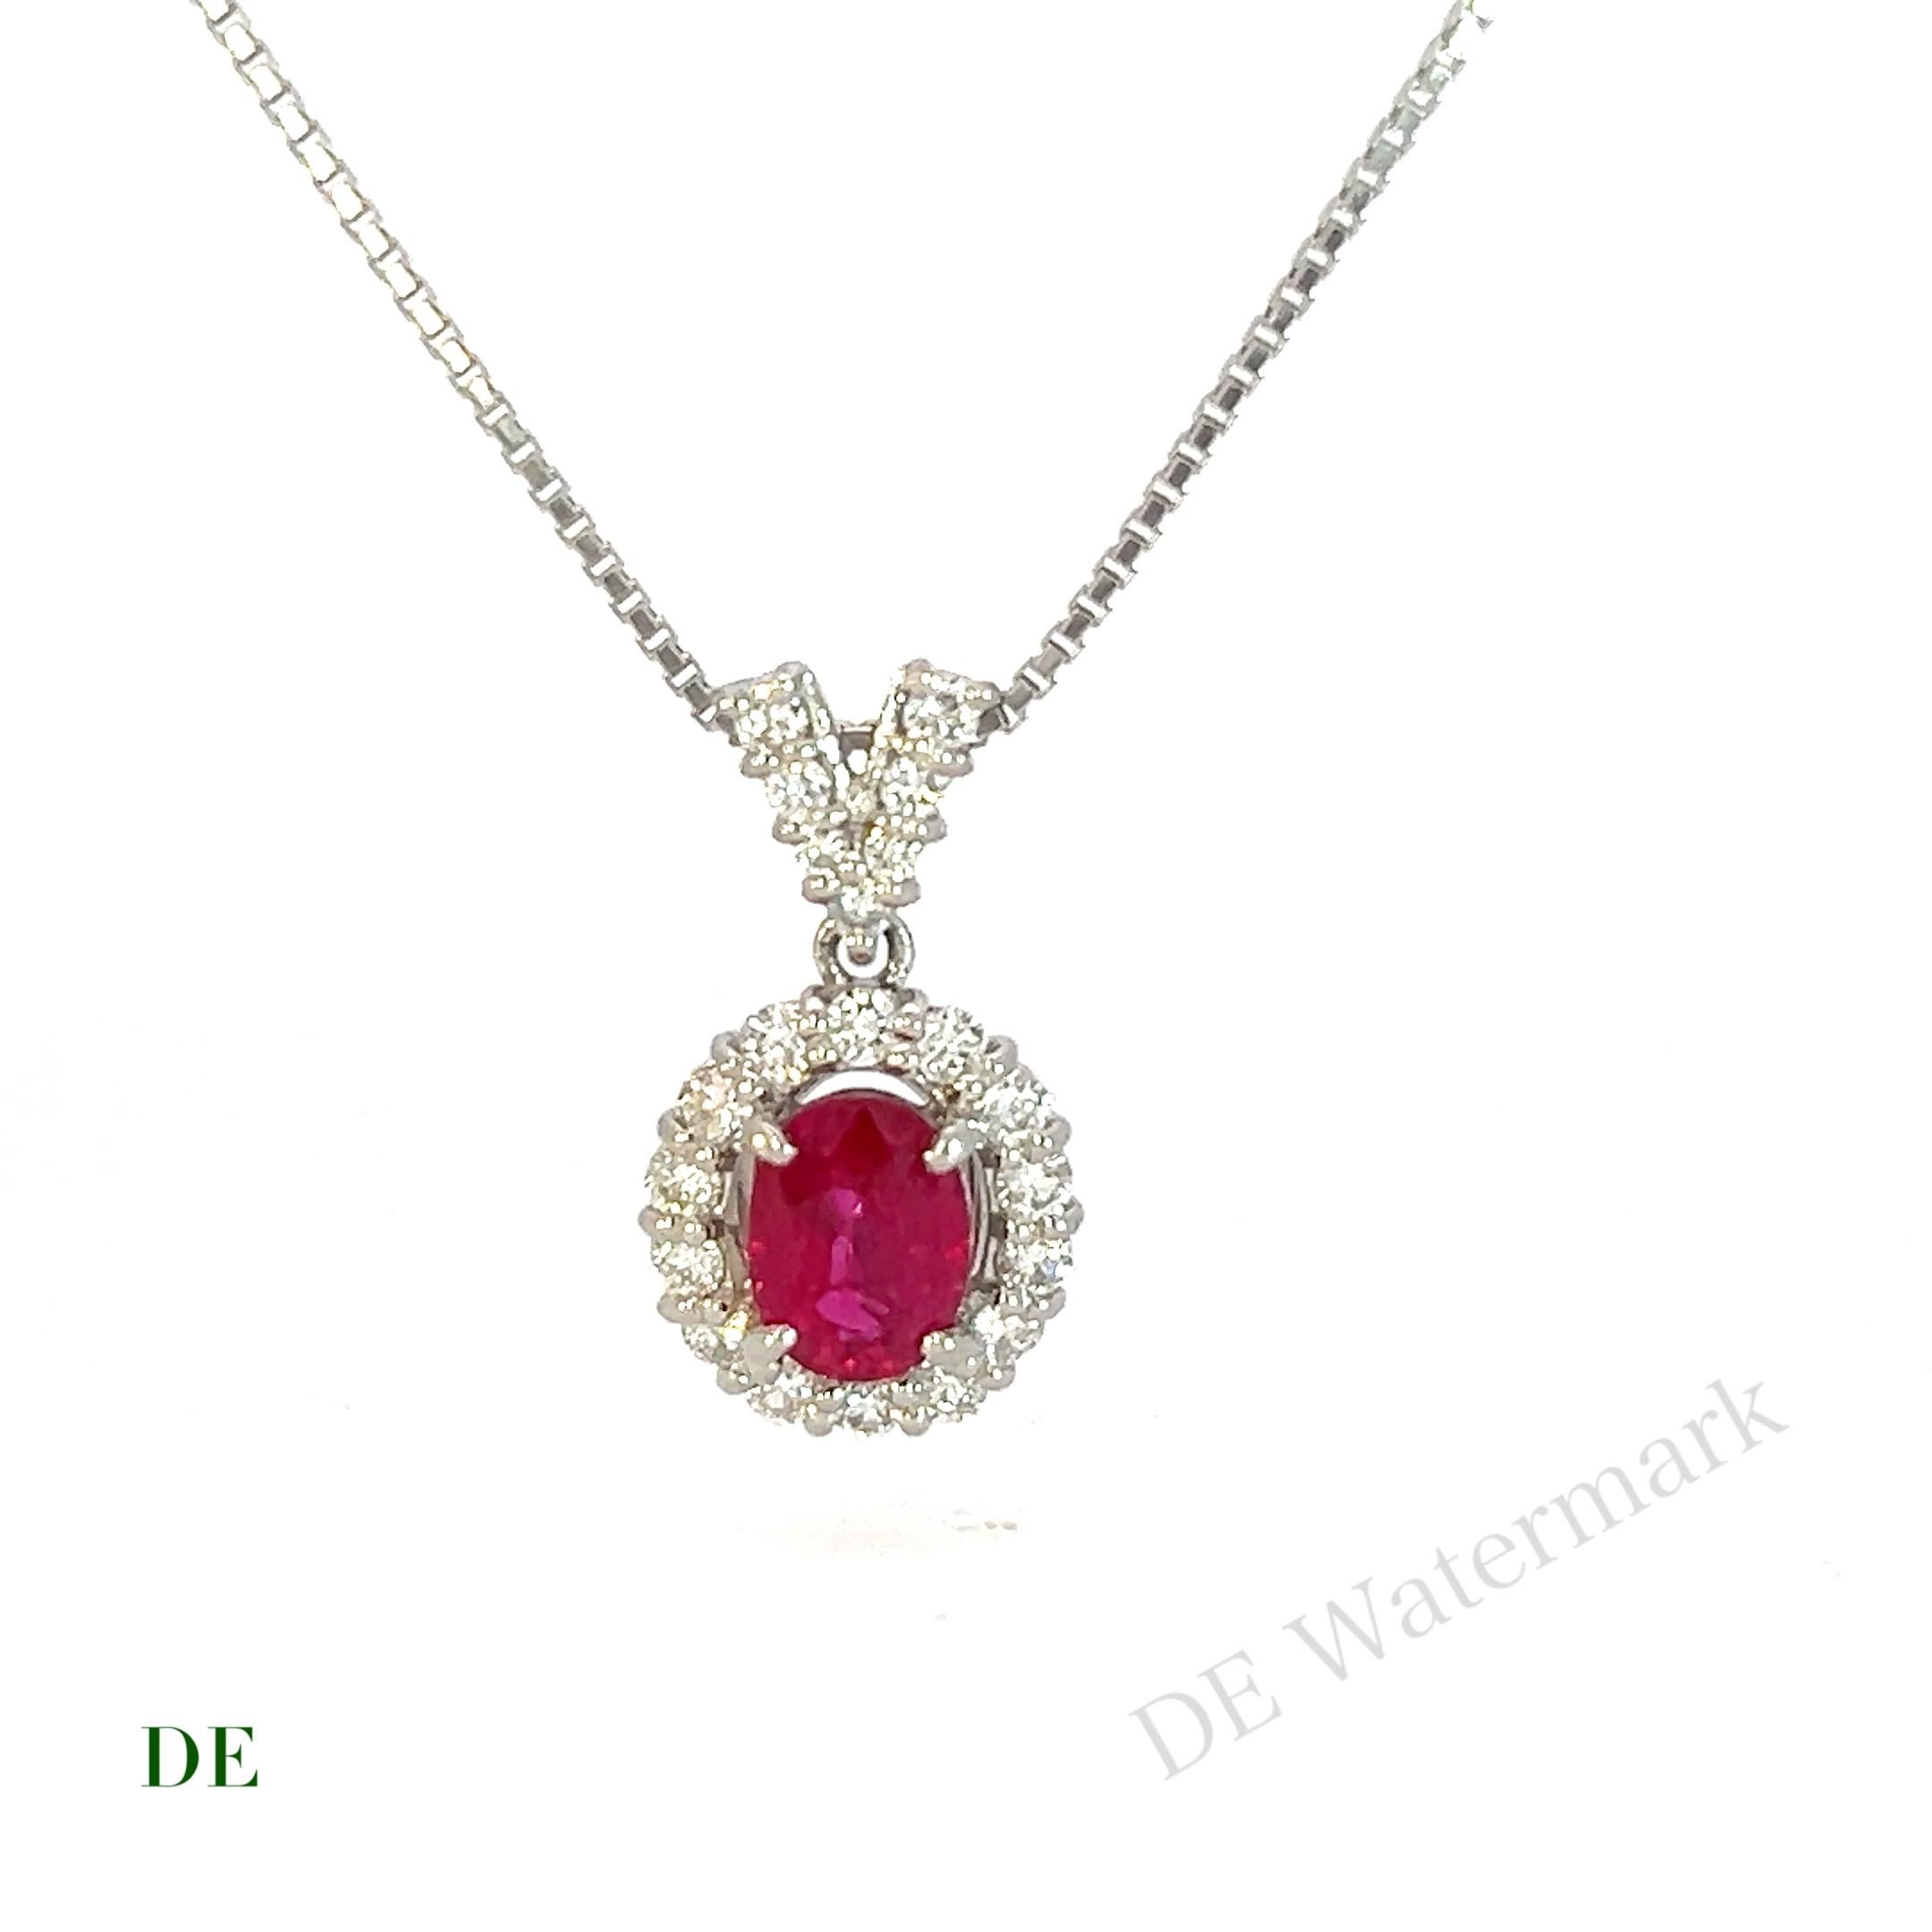 Rare GIA Platinum gold .94 crt Vivid Red Ruby Burmese .4 crt Diamond Necklace

Introducing our Rare GIA Platinum and Gold Vivid Red Ruby Burmese Diamond Necklace, a truly exquisite piece that combines the intense beauty of a .94 carat vivid red